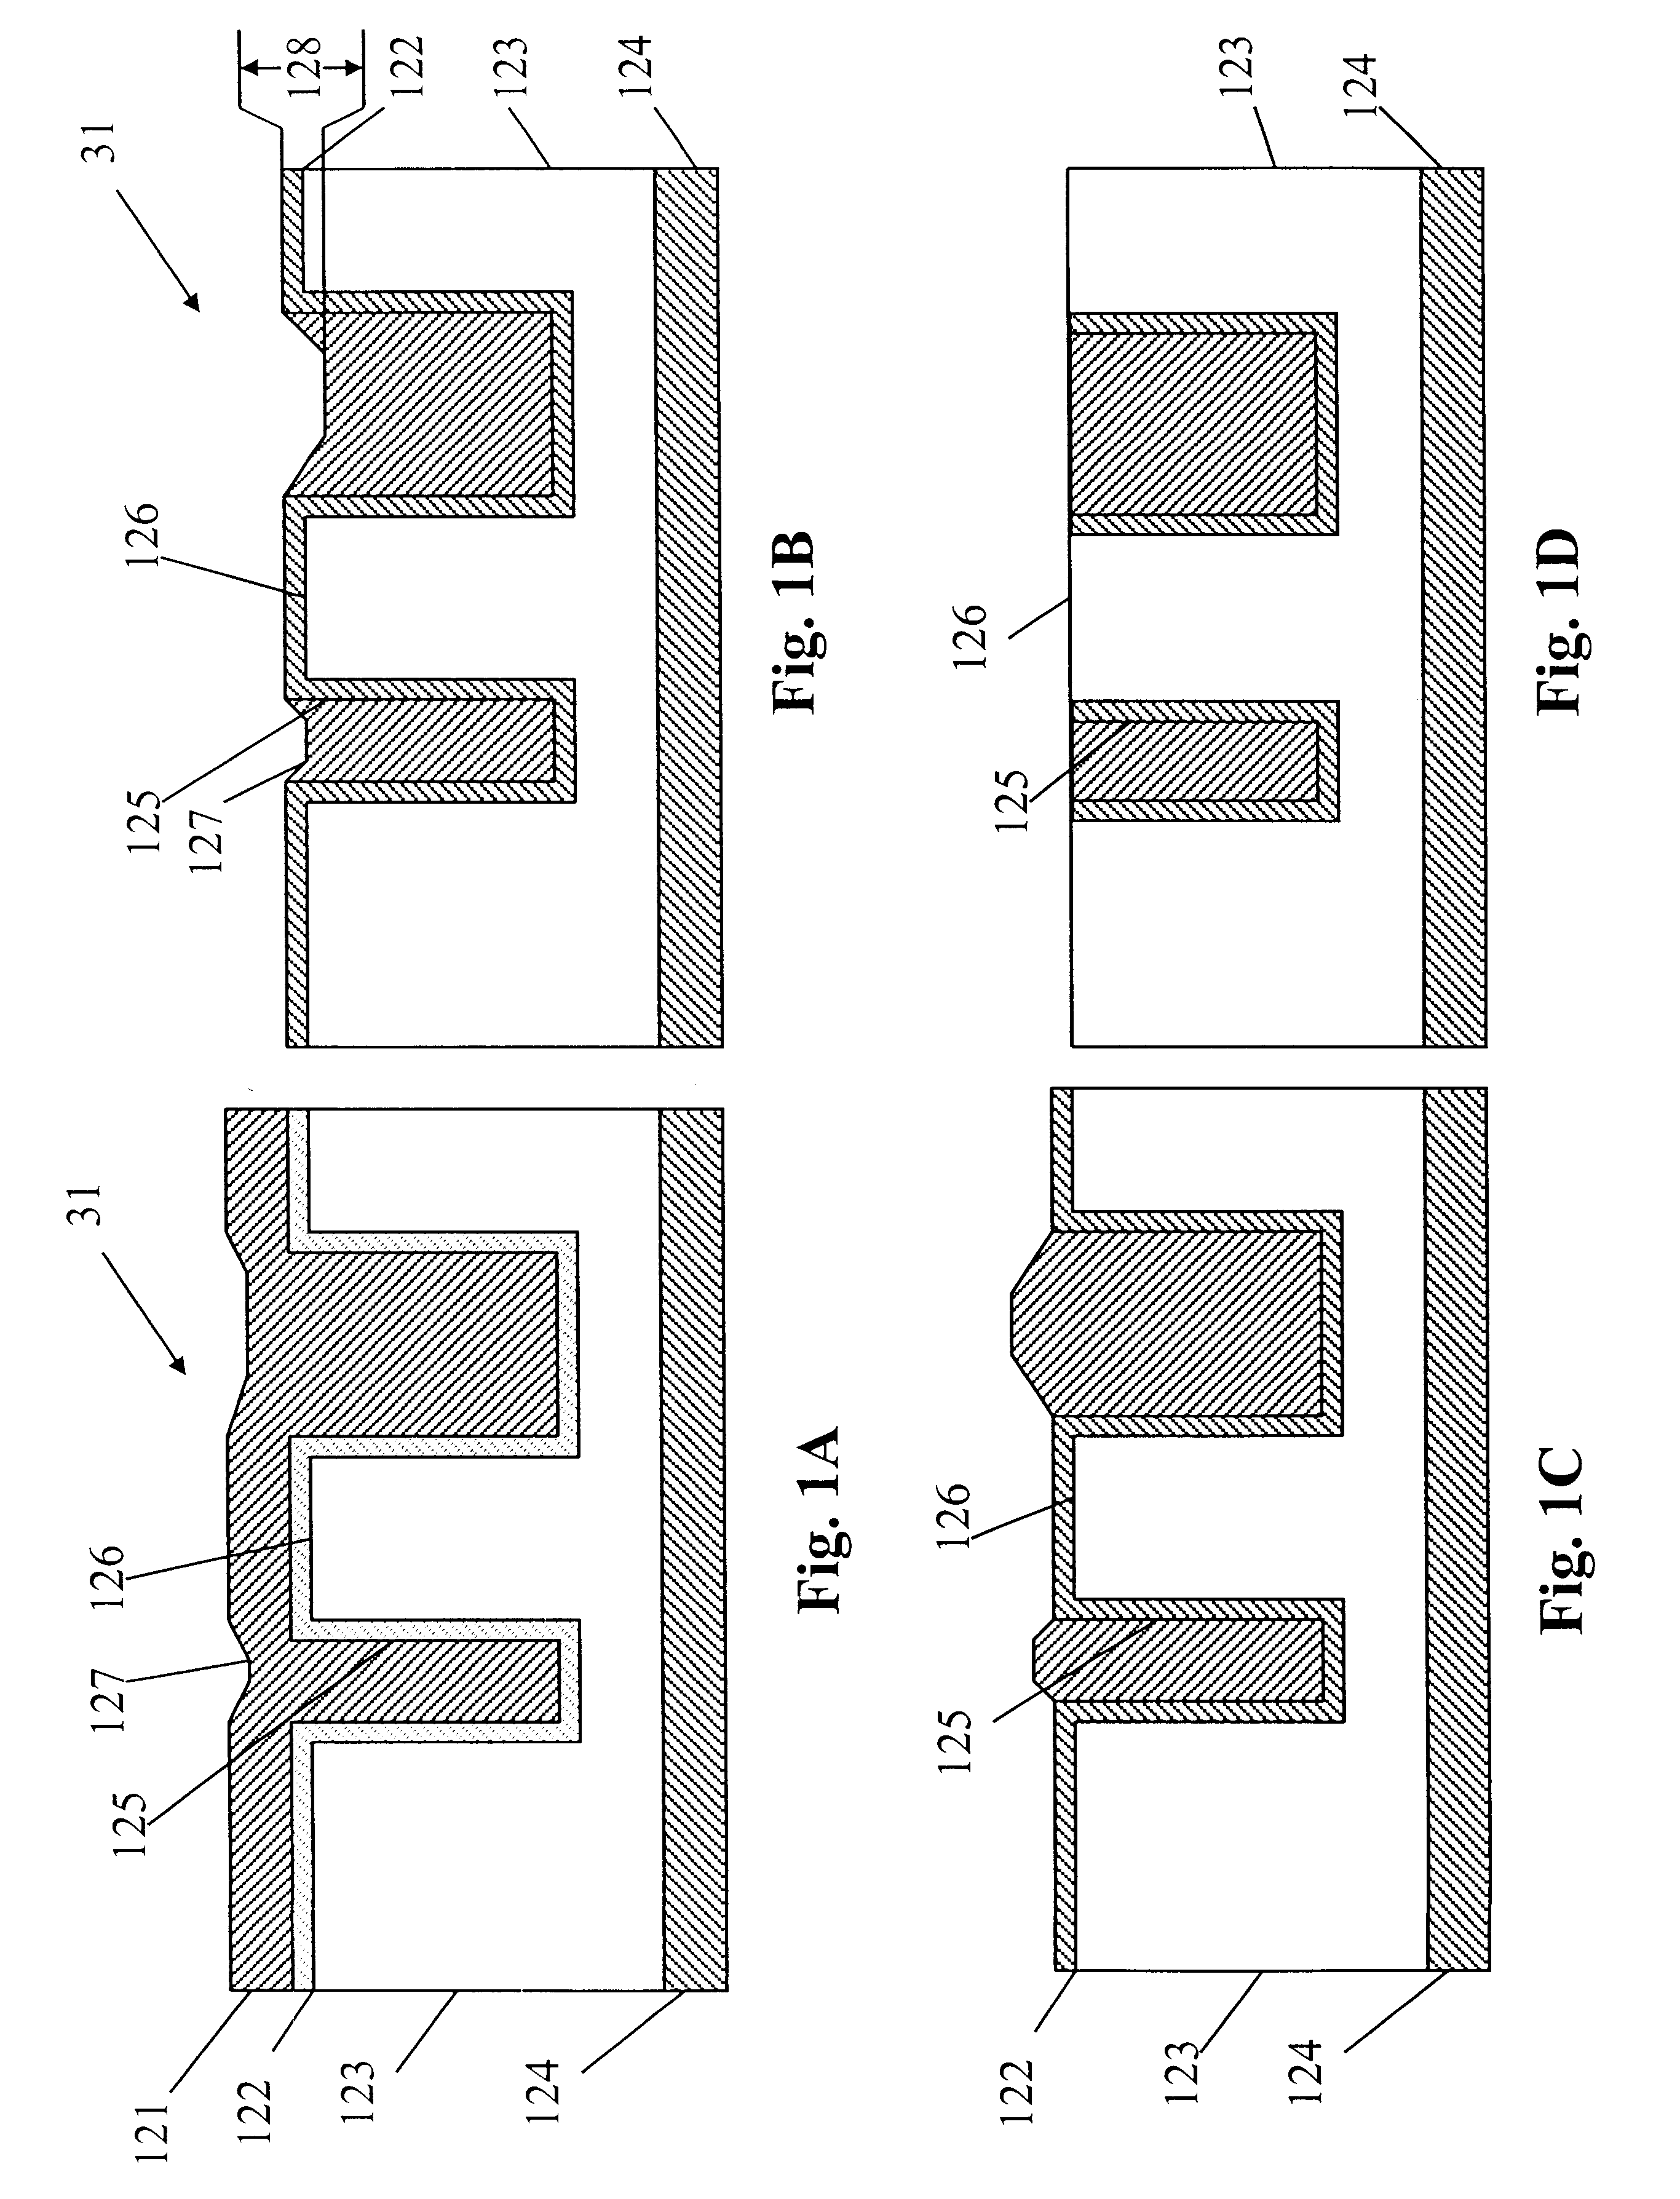 Method for electropolishing metal on semiconductor devices